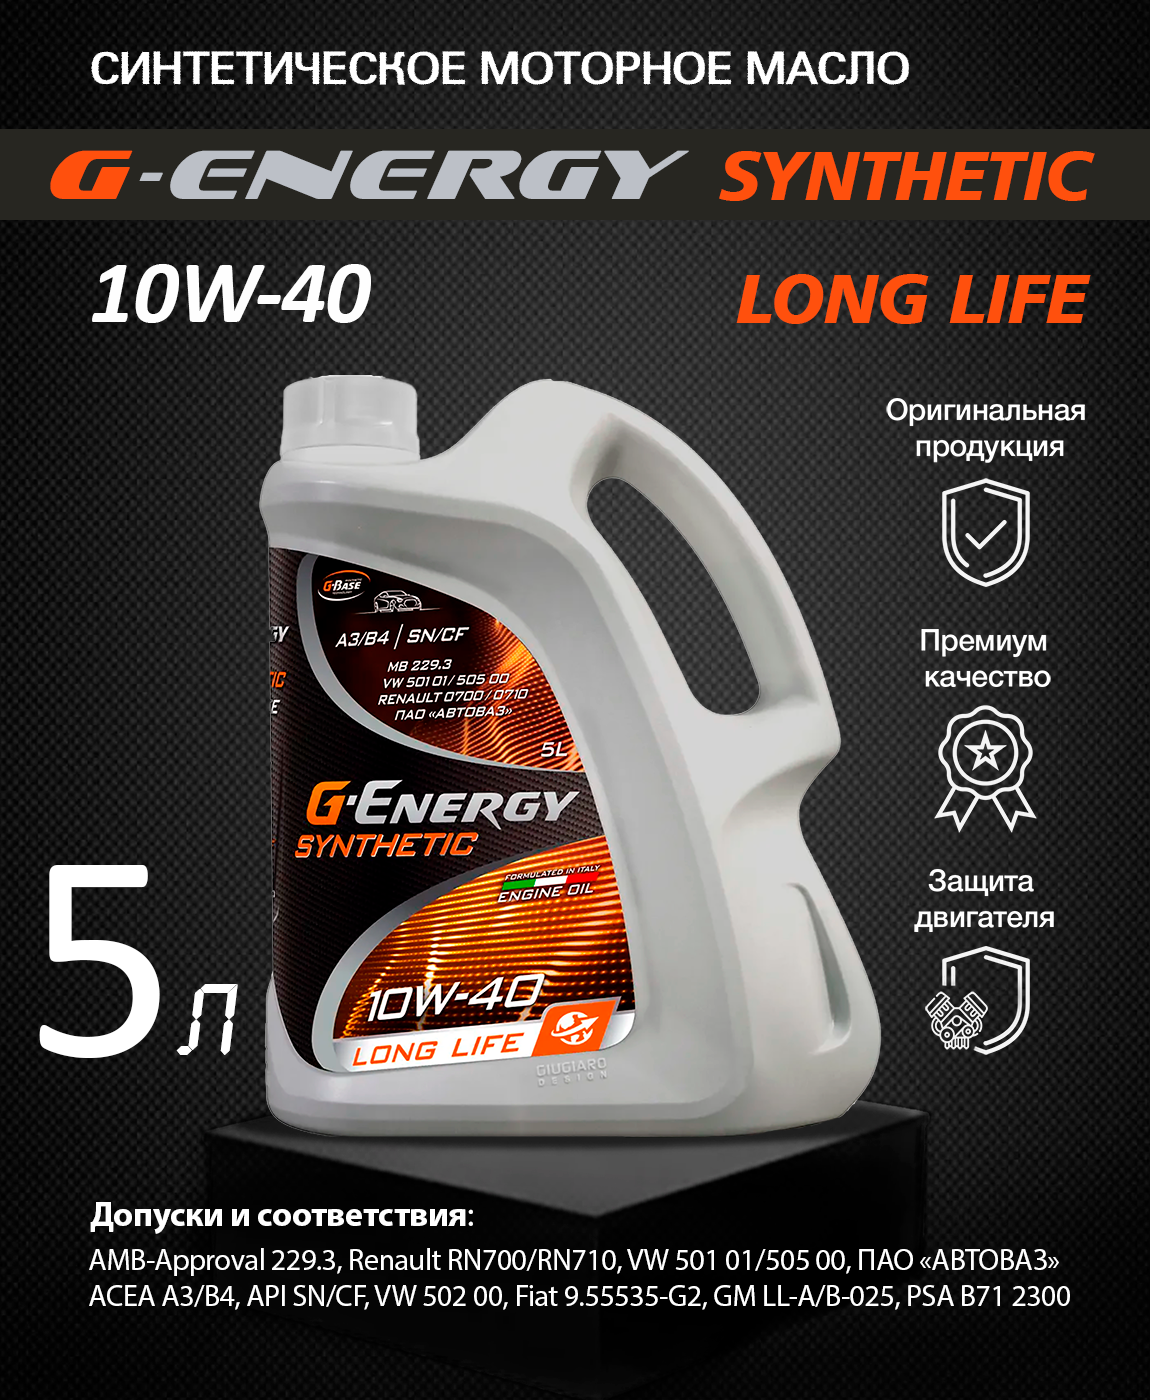 Масло g energy synthetic 5w 40. G-Energy Synthetic Active 5w-40. G-Energy Synthetic Active 5w-30. Масло g Energy 5w30 far East. Масло g Energy Synthetic Active 5w30.